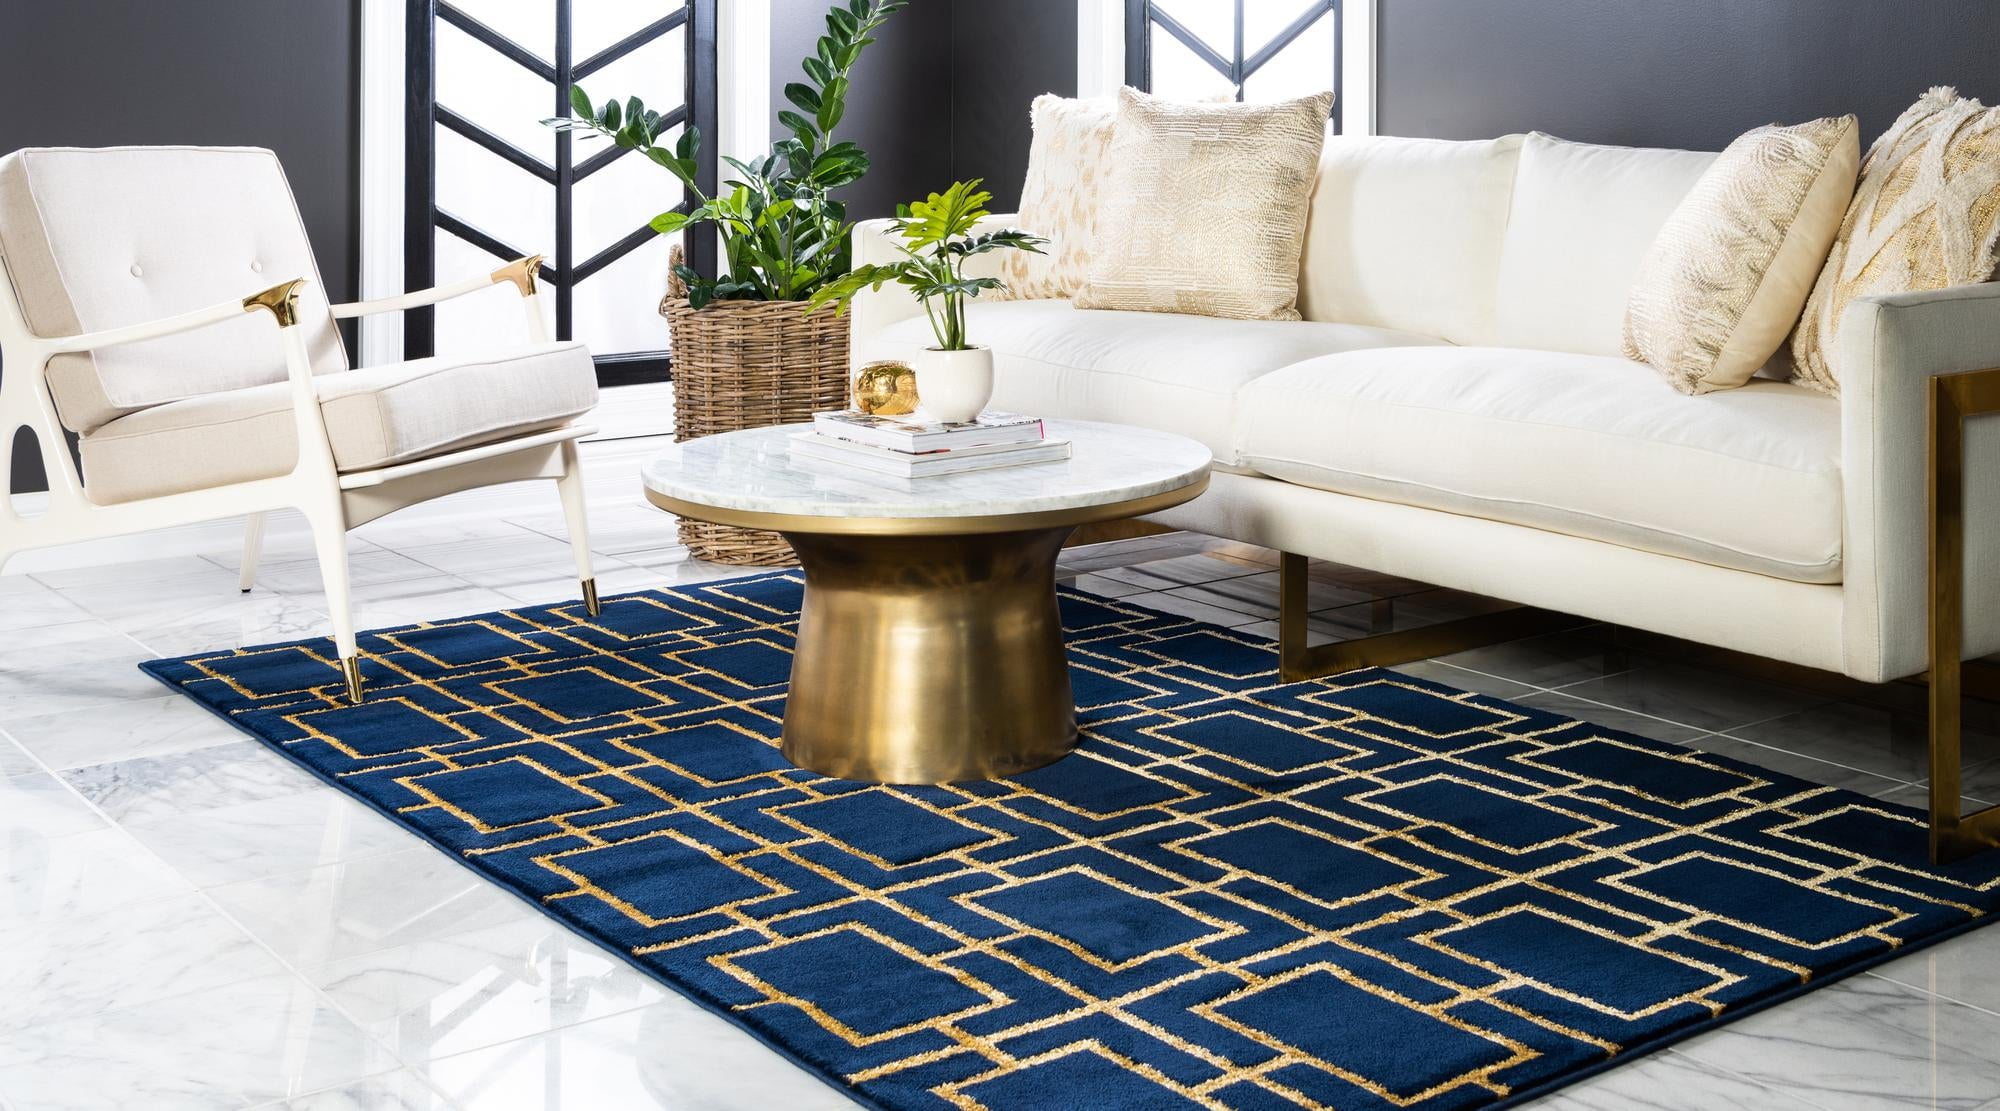  Rydowenna Square Area Rugs 3x3 Navy Blue Gold Aesthetic Carpet  for LivingRoom Bedroom Marble Pattern Under DiningCoffee Table Farmhouse  Home Office Floor Mats Kitchen Laundry Bathroom, 3x3ft : Home & Kitchen